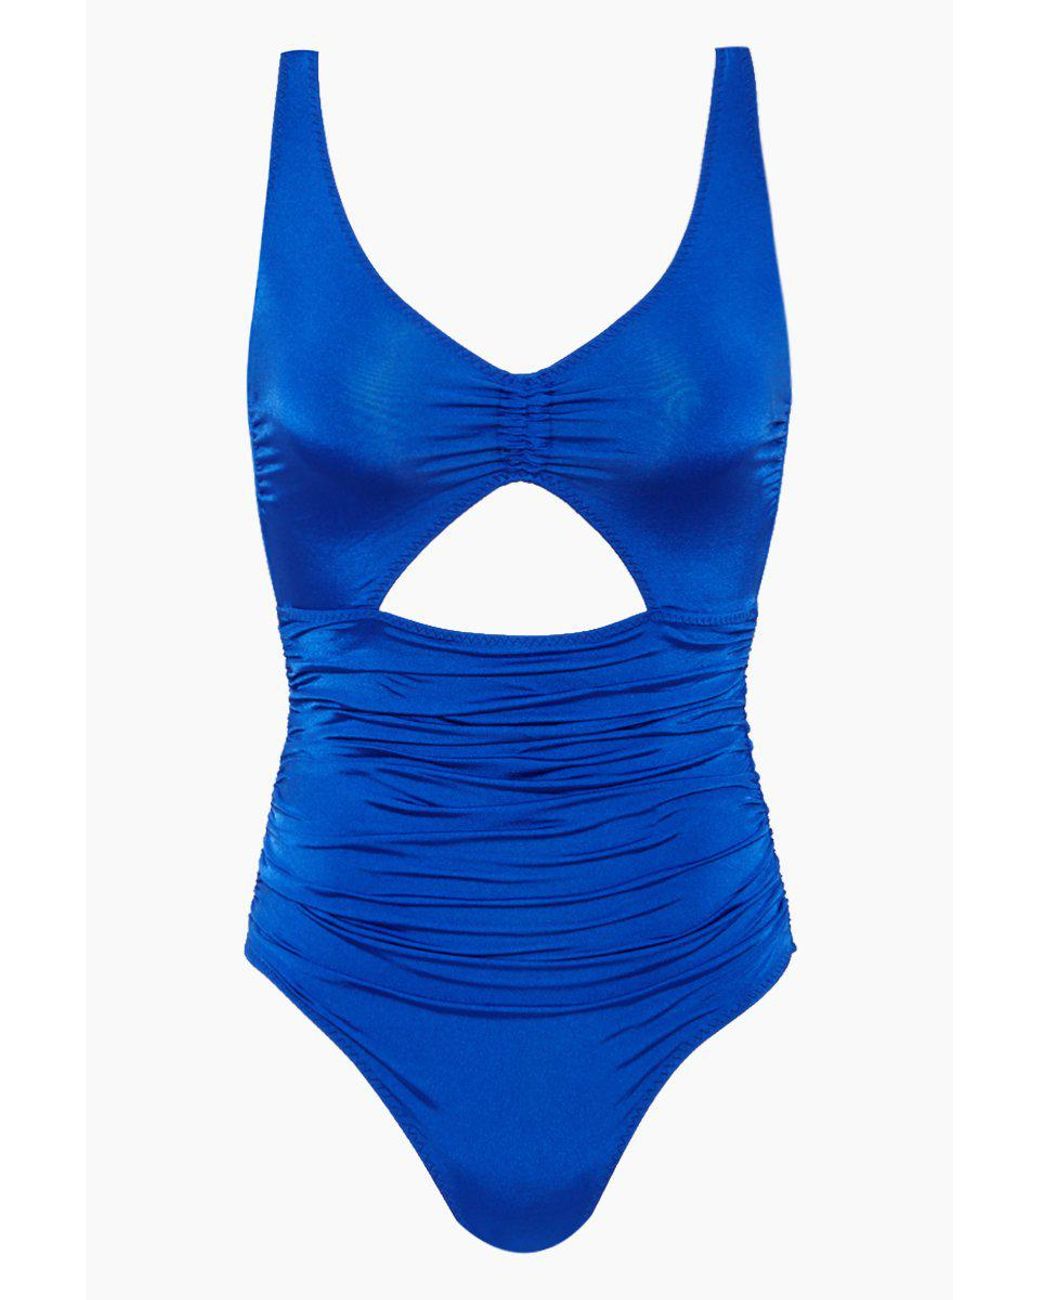 Stella McCartney Wrapped One Piece Swimsuit - Royal Blue - Lyst